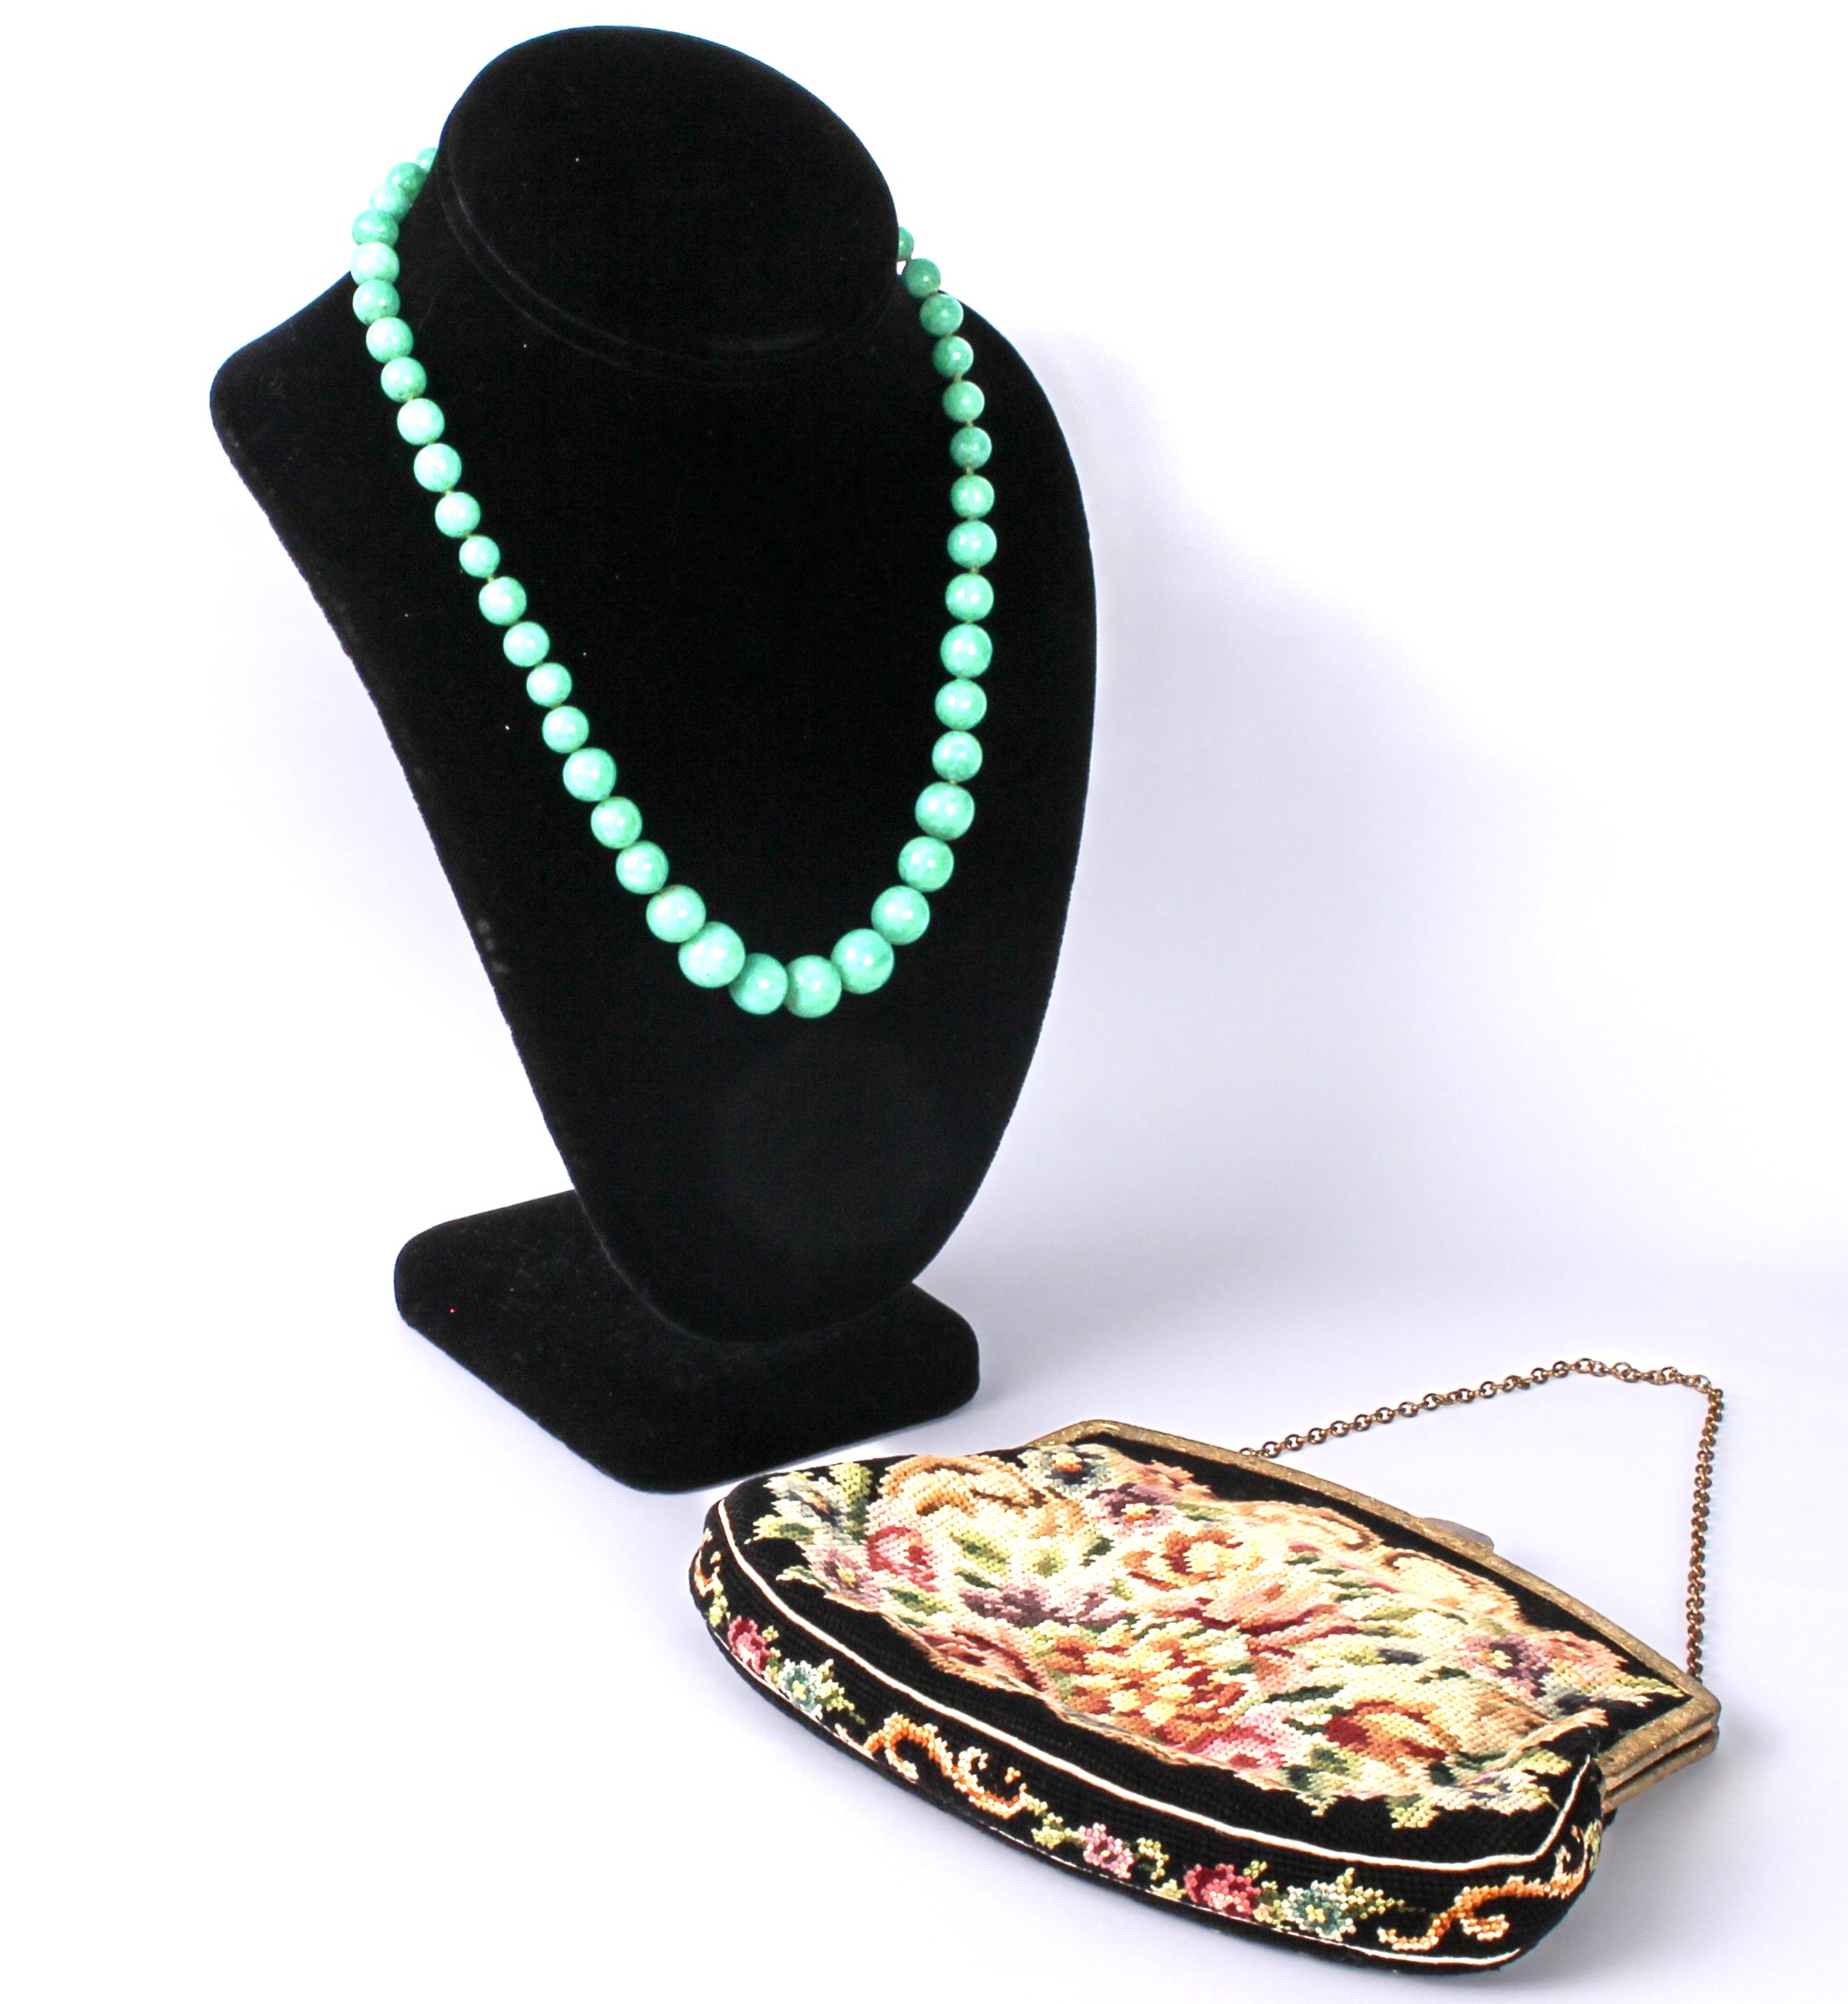 A vintage green glass jade-style bead necklace - mid-century, with 9ct gold clasp, 45.75 cm long;